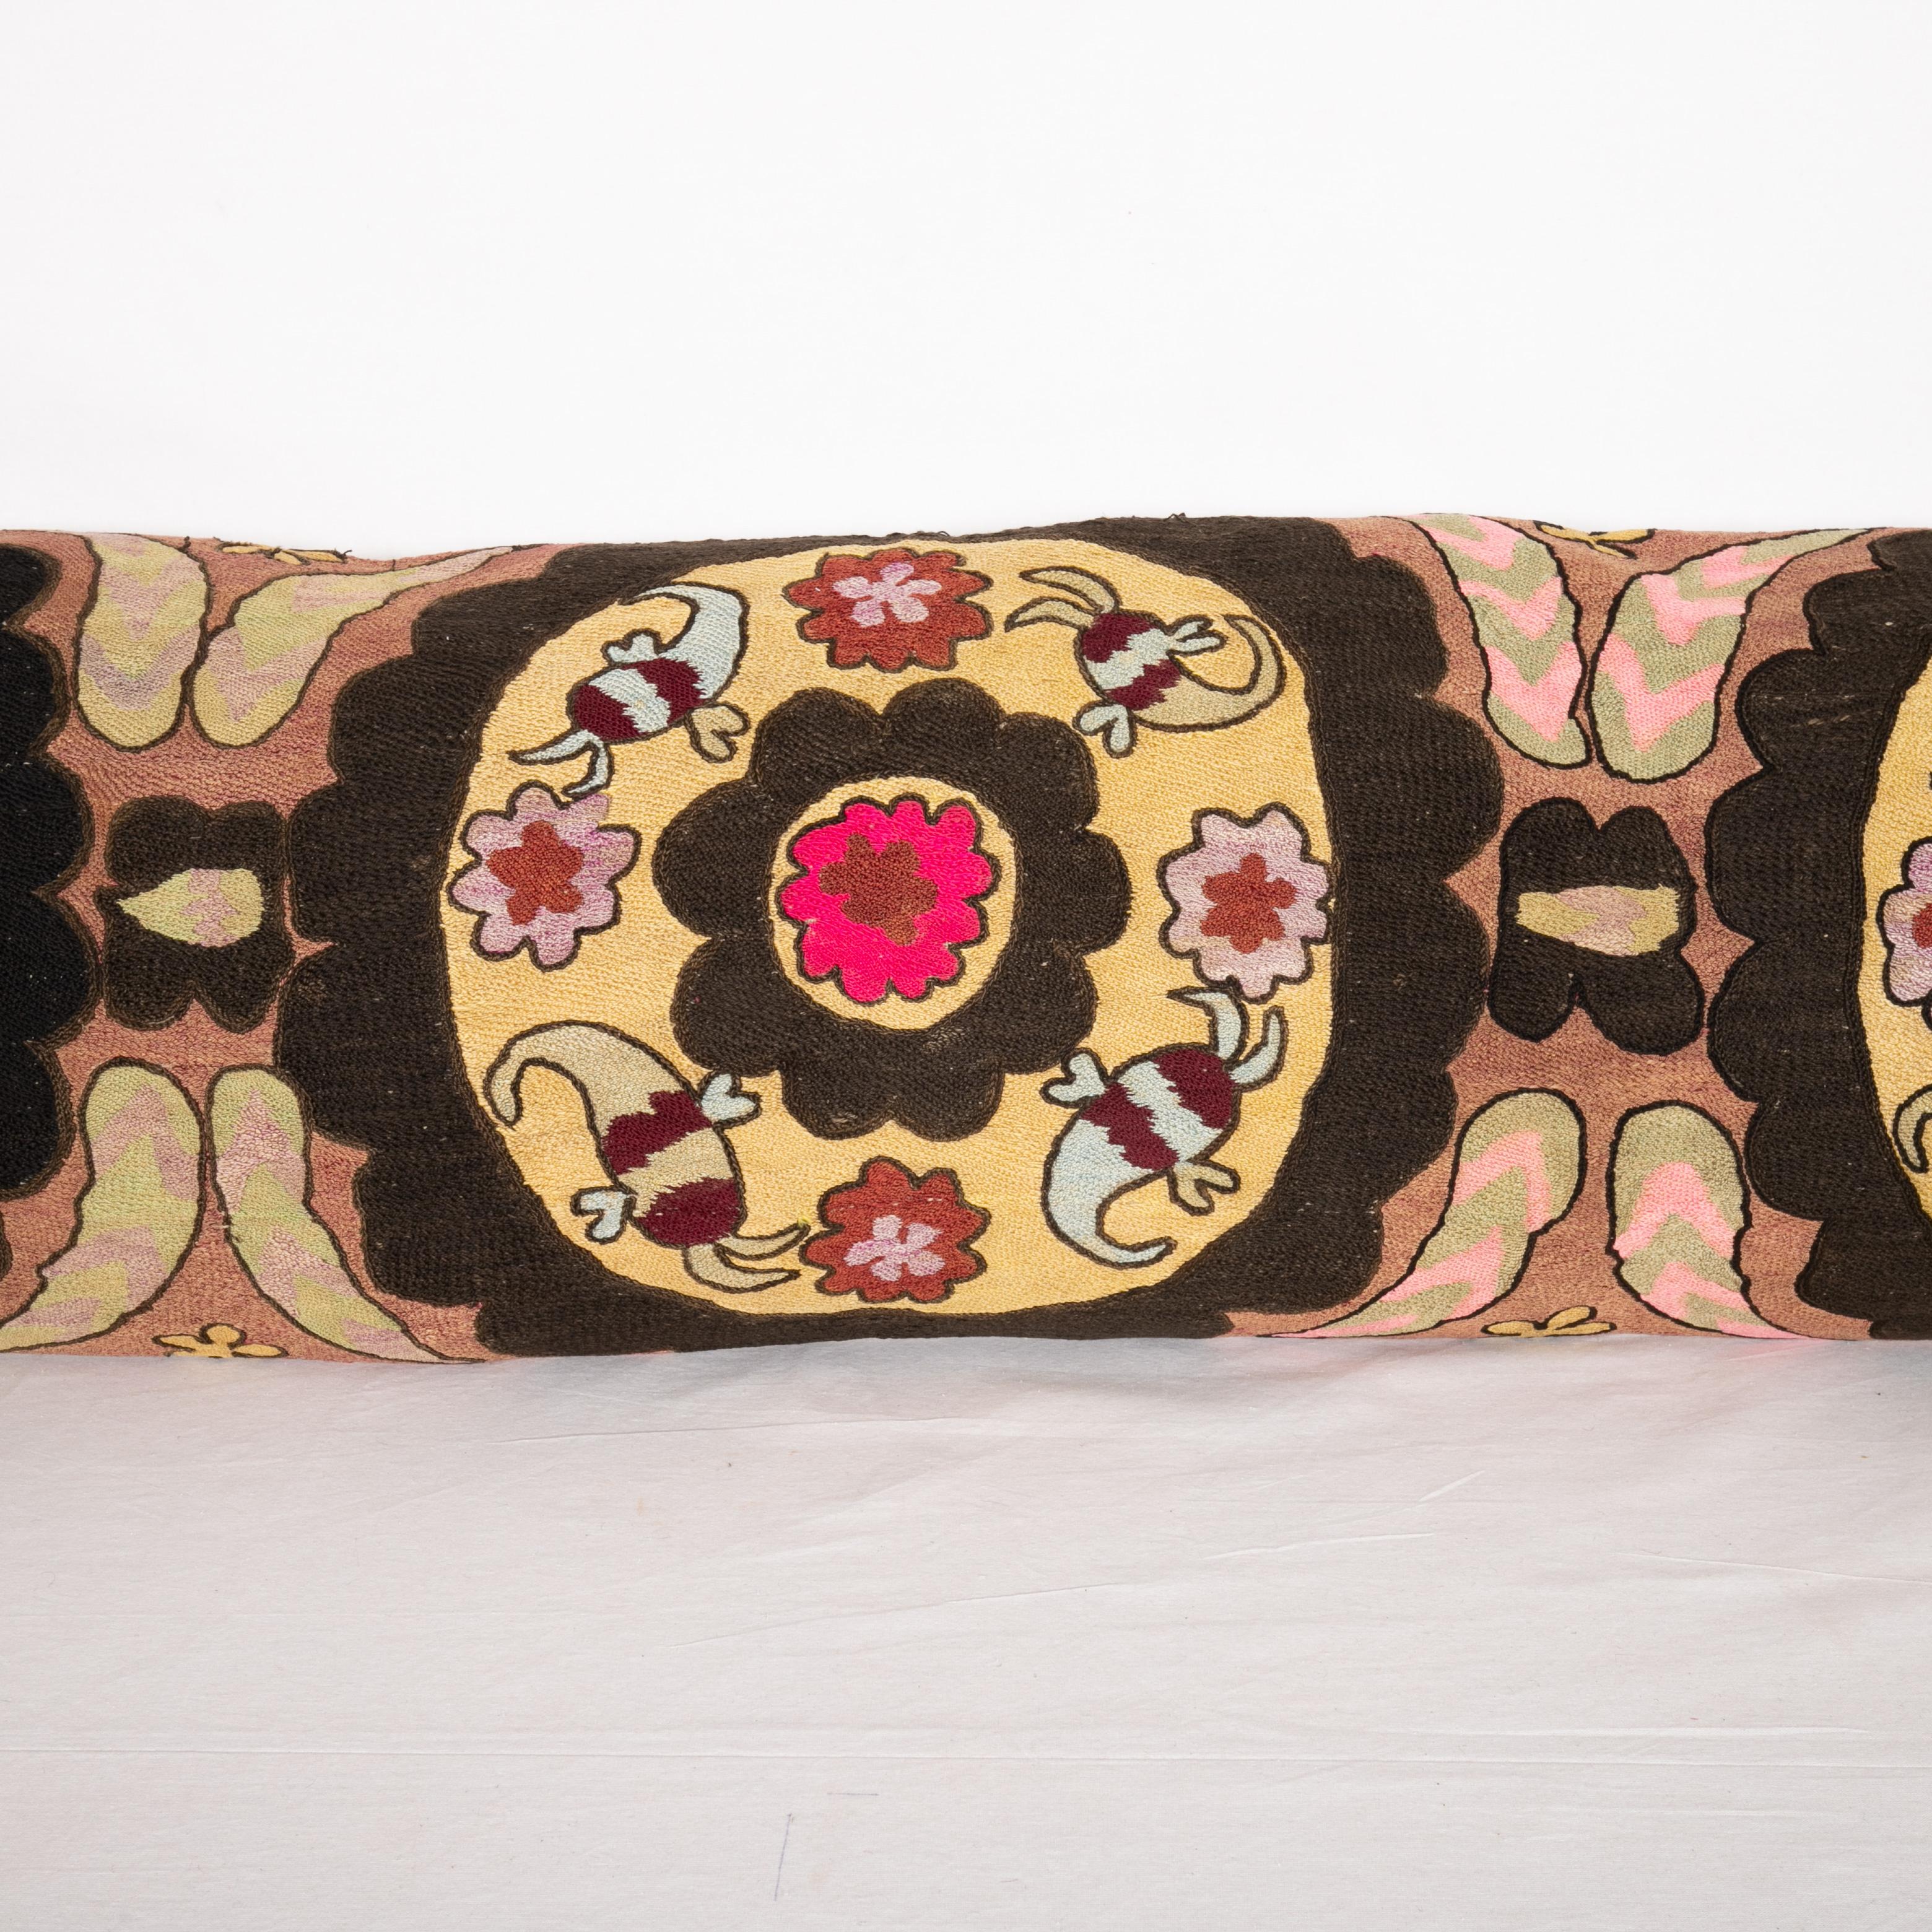 Uzbek Body Pillow Fashioned from a Mid-20th Century Tashkent Suzani For Sale